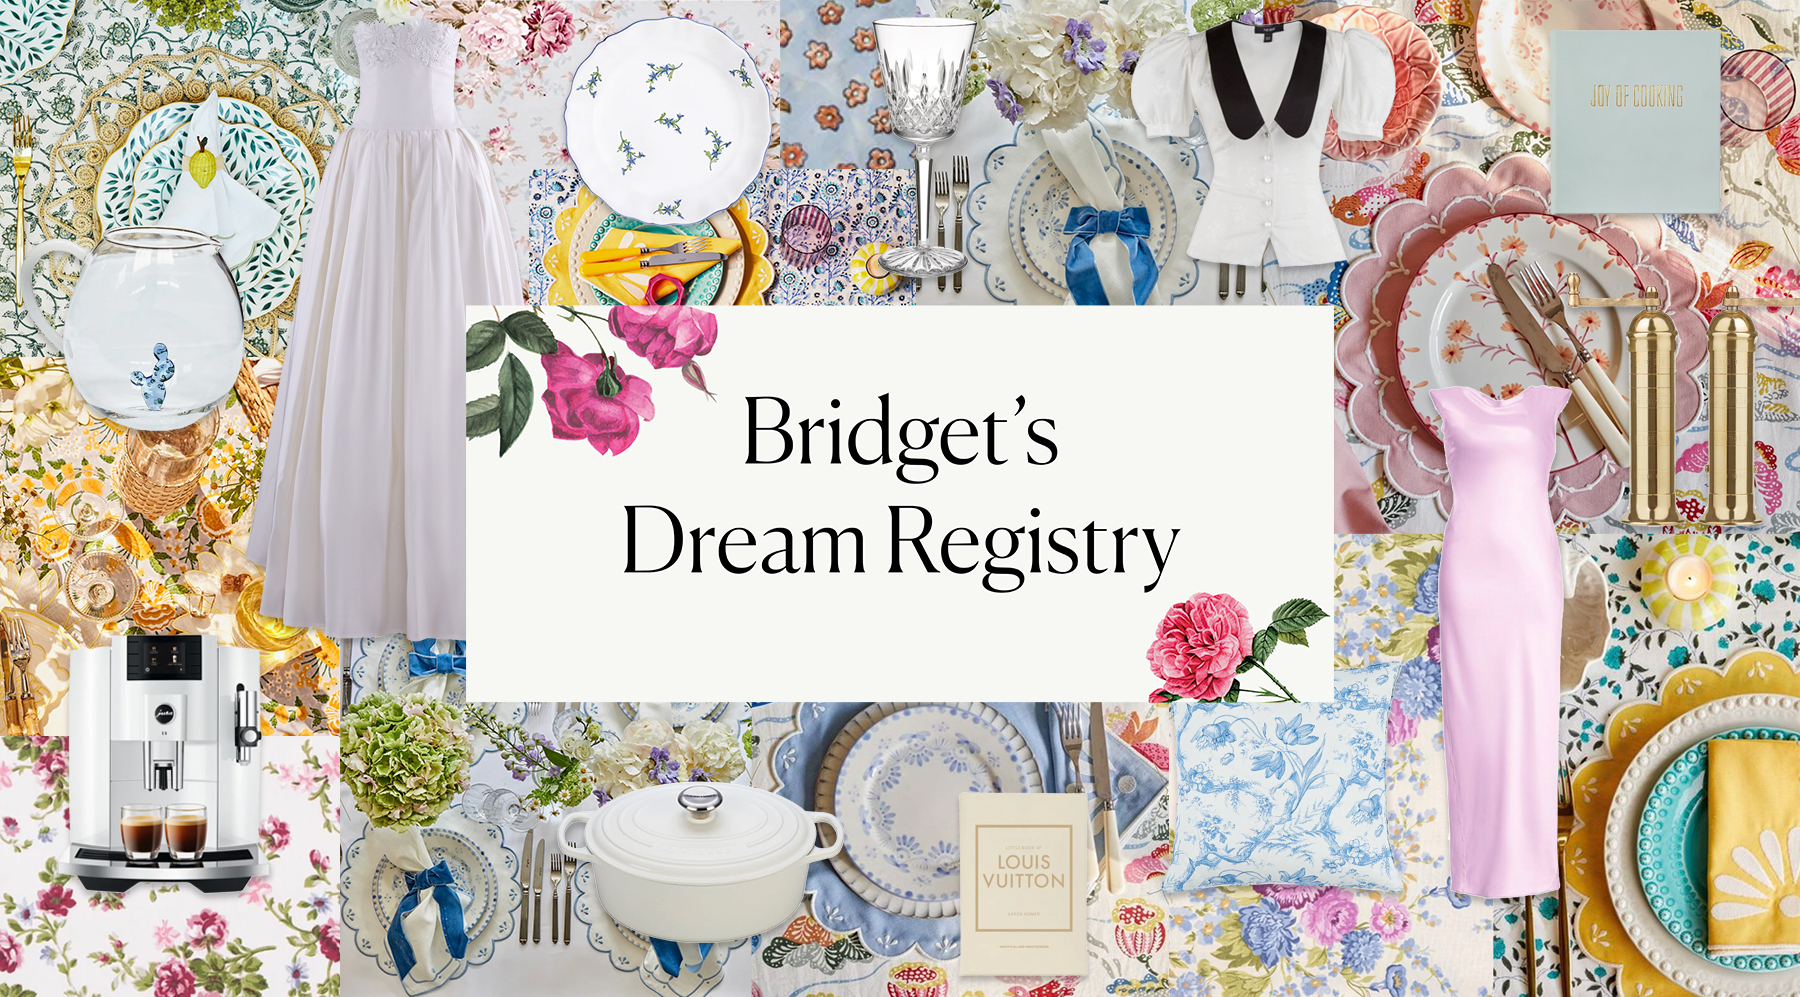 The Bar Co-Founder Bridget Bahl's Dream Registry is Filled With